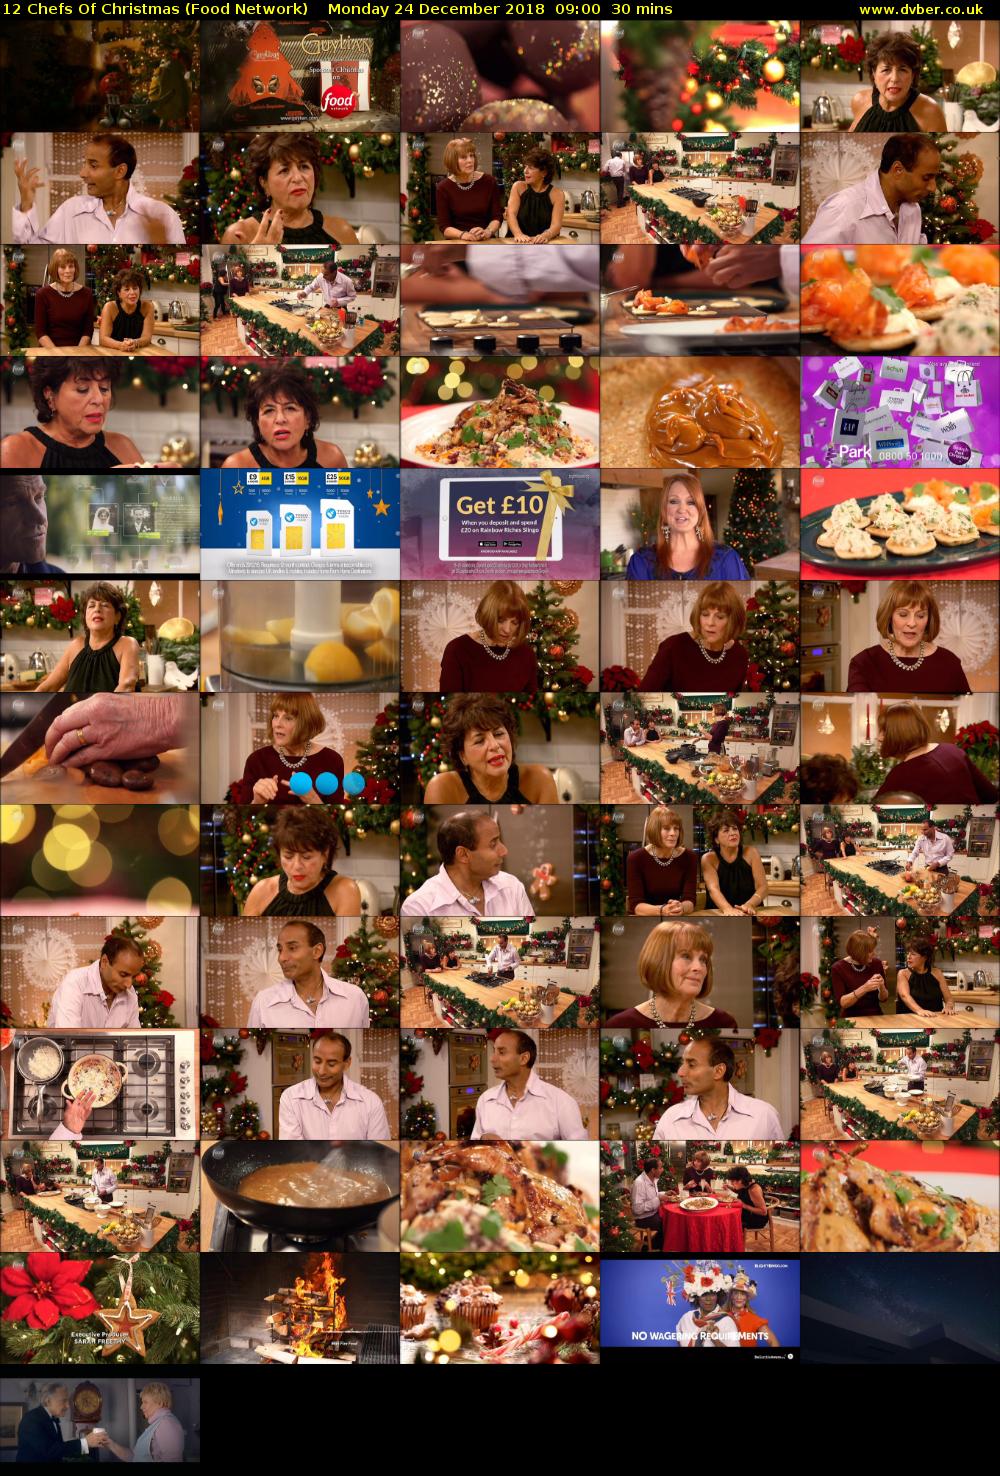 12 Chefs Of Christmas (Food Network) Monday 24 December 2018 09:00 - 09:30